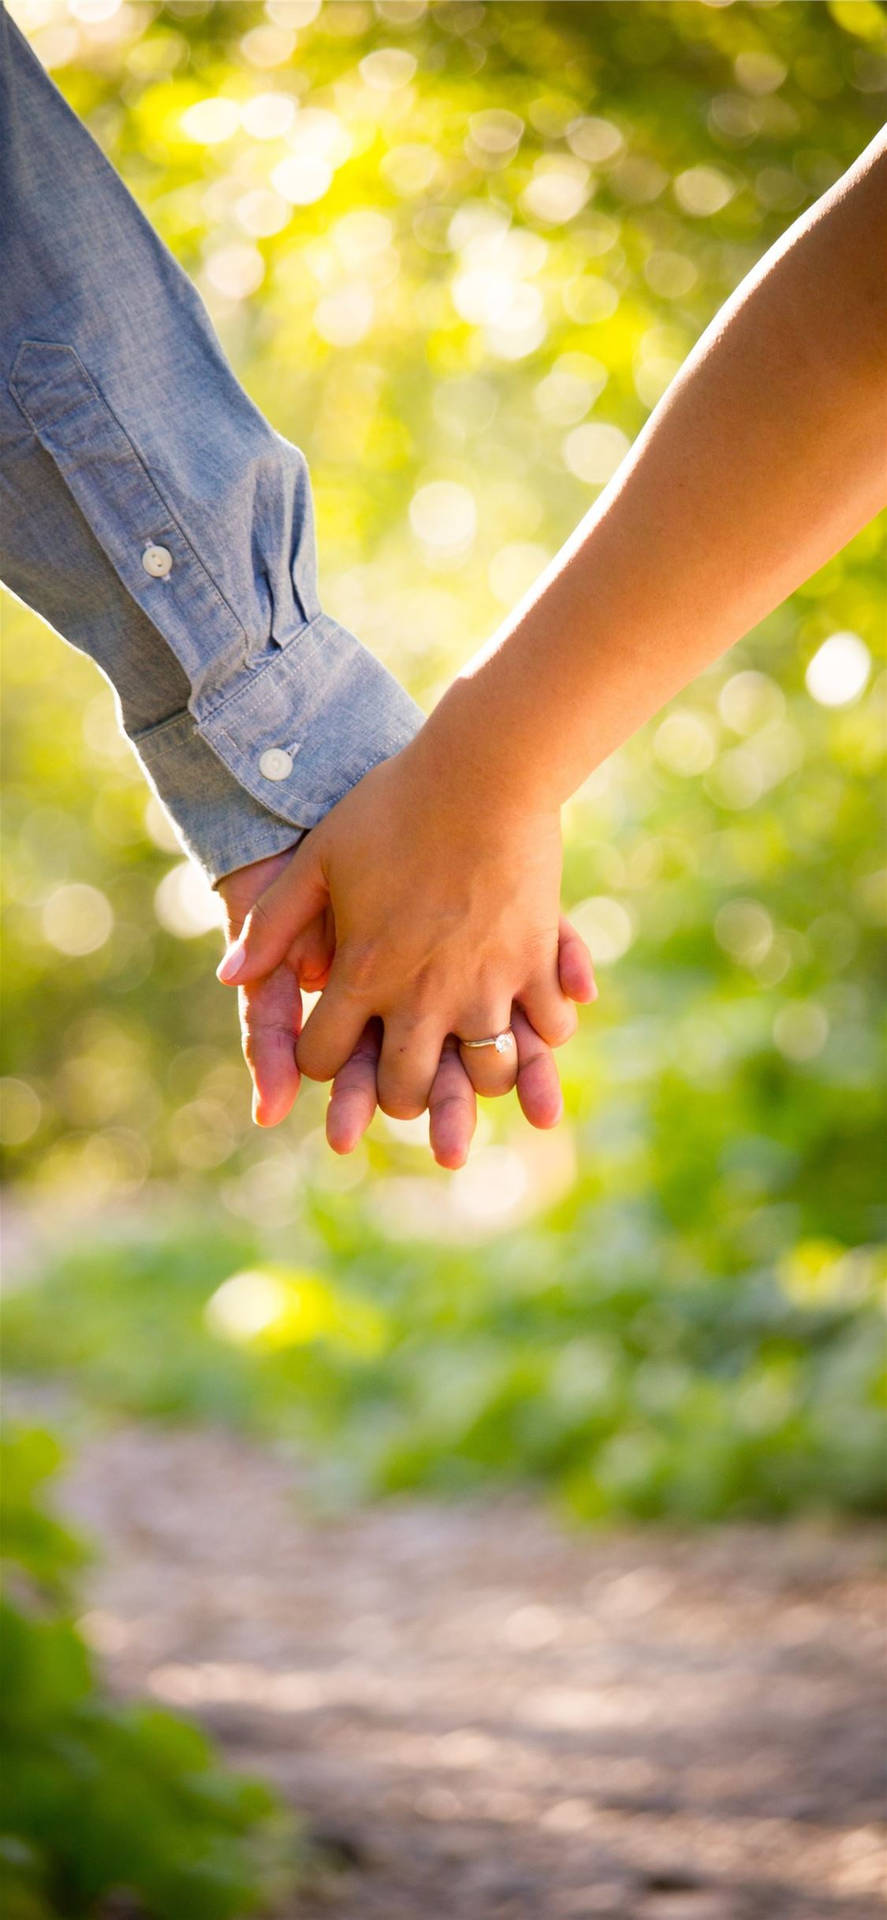 Holding Hands In Green Grass And Leaves Wallpaper